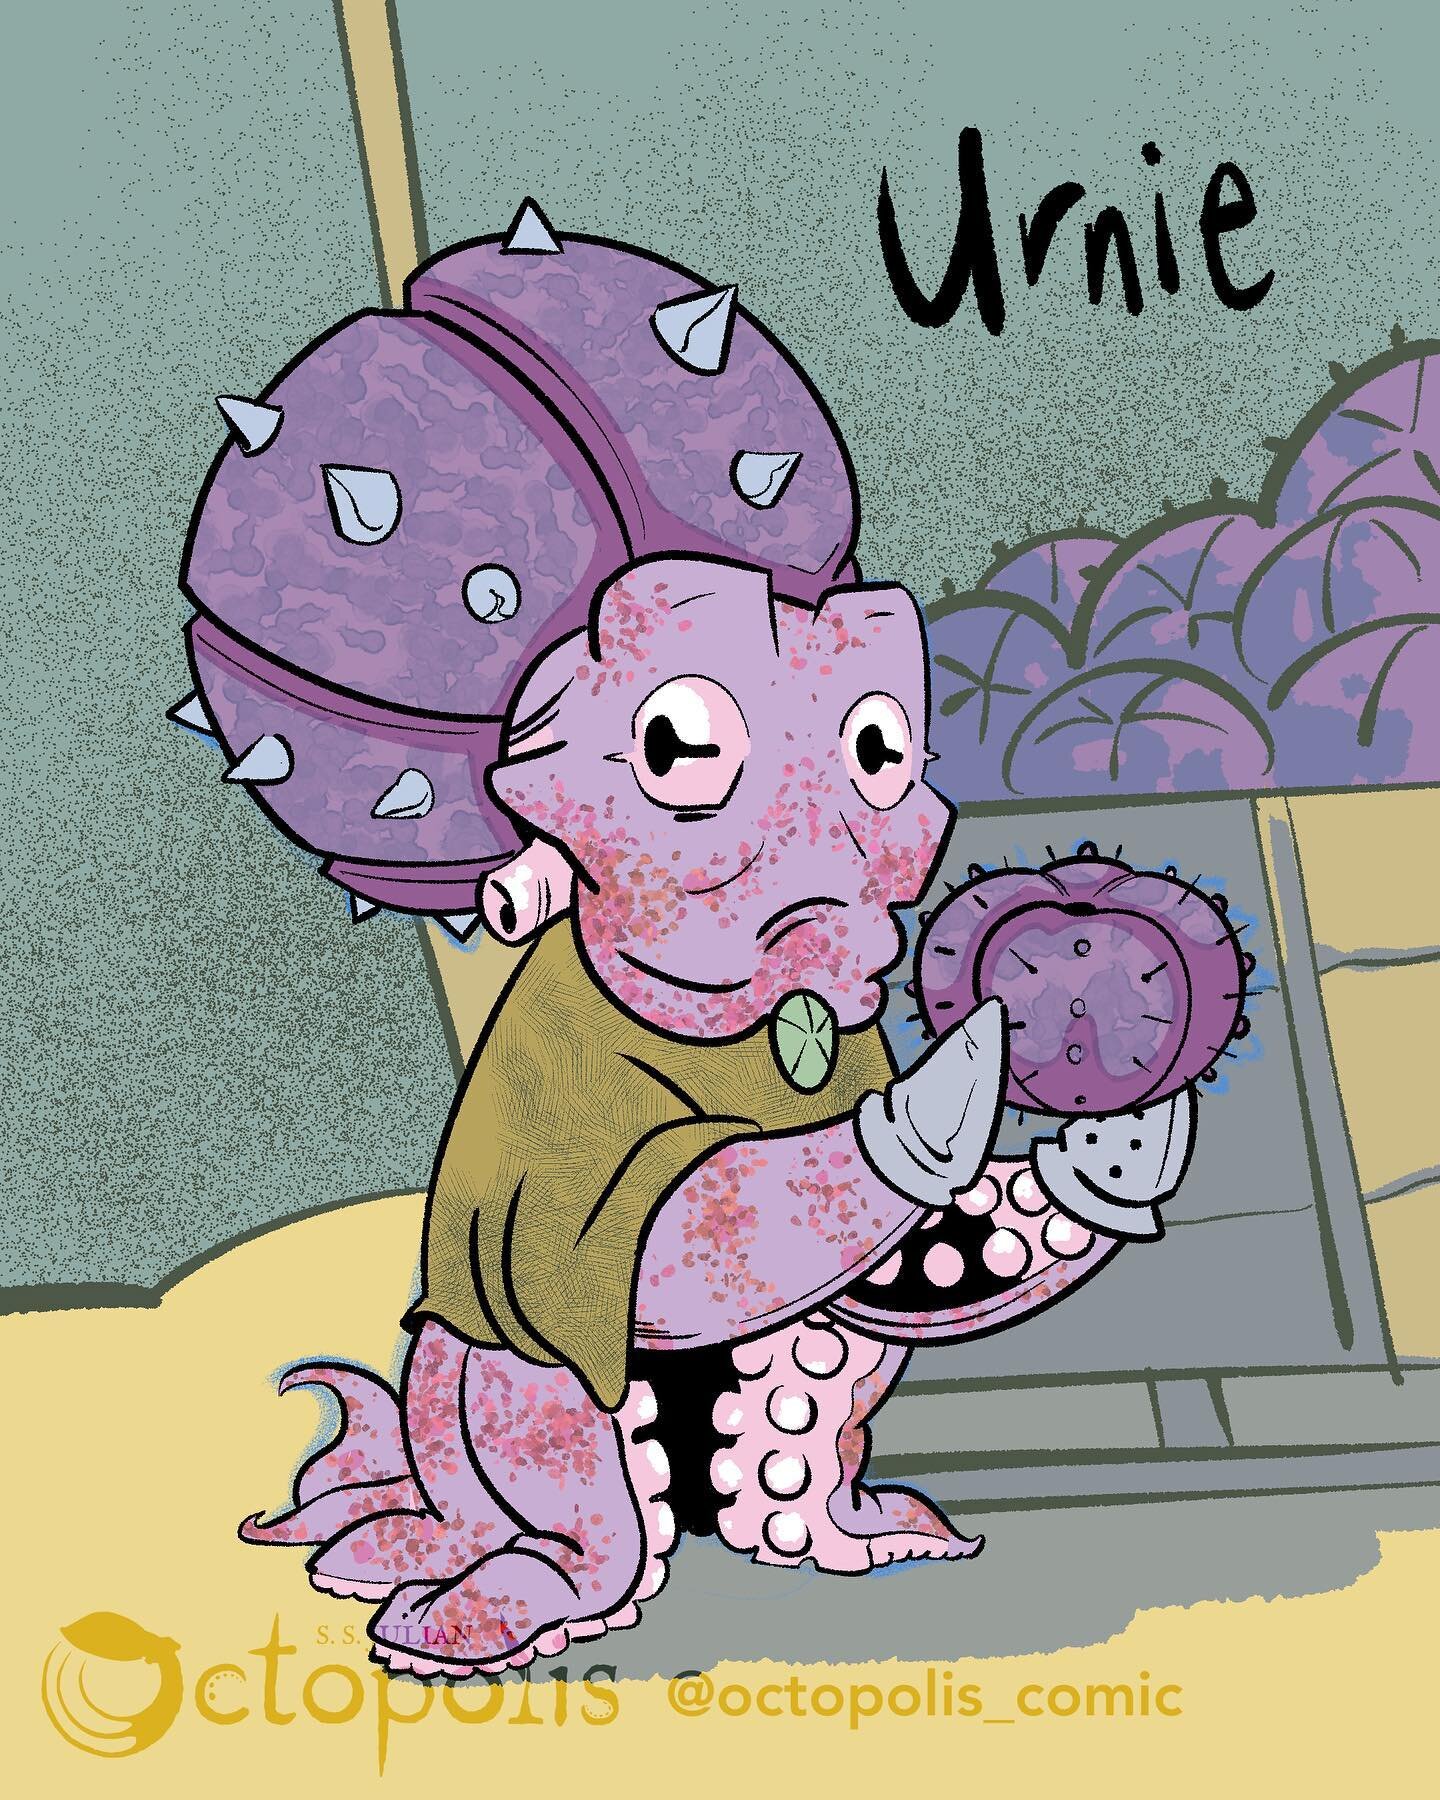 Octopolis Profiles: Urnie the urchin merchant specializes in importing these spiny echinoderms  from her native coastline to Octopolis. They make delicious daytime snacks for a working octopus, and their spines have use as needles, writing nibs and m